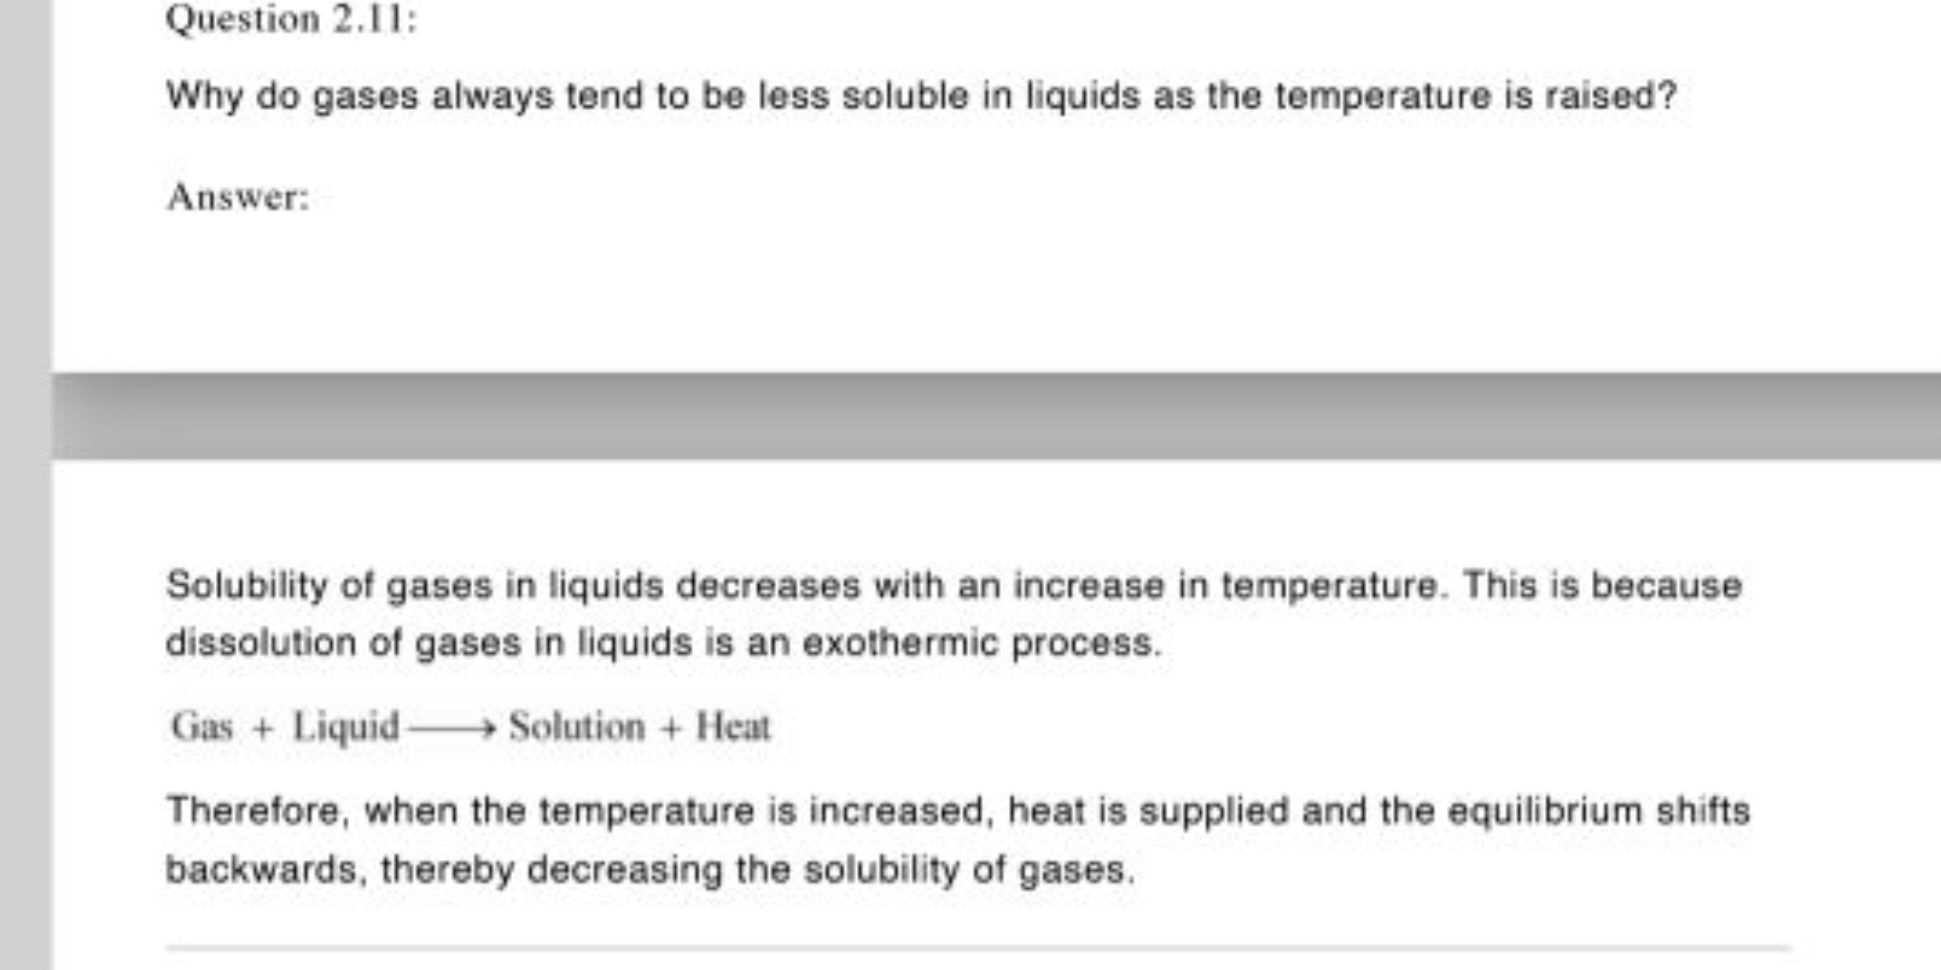 Question 2.11:
Why do gases always tend to be less soluble in liquids 